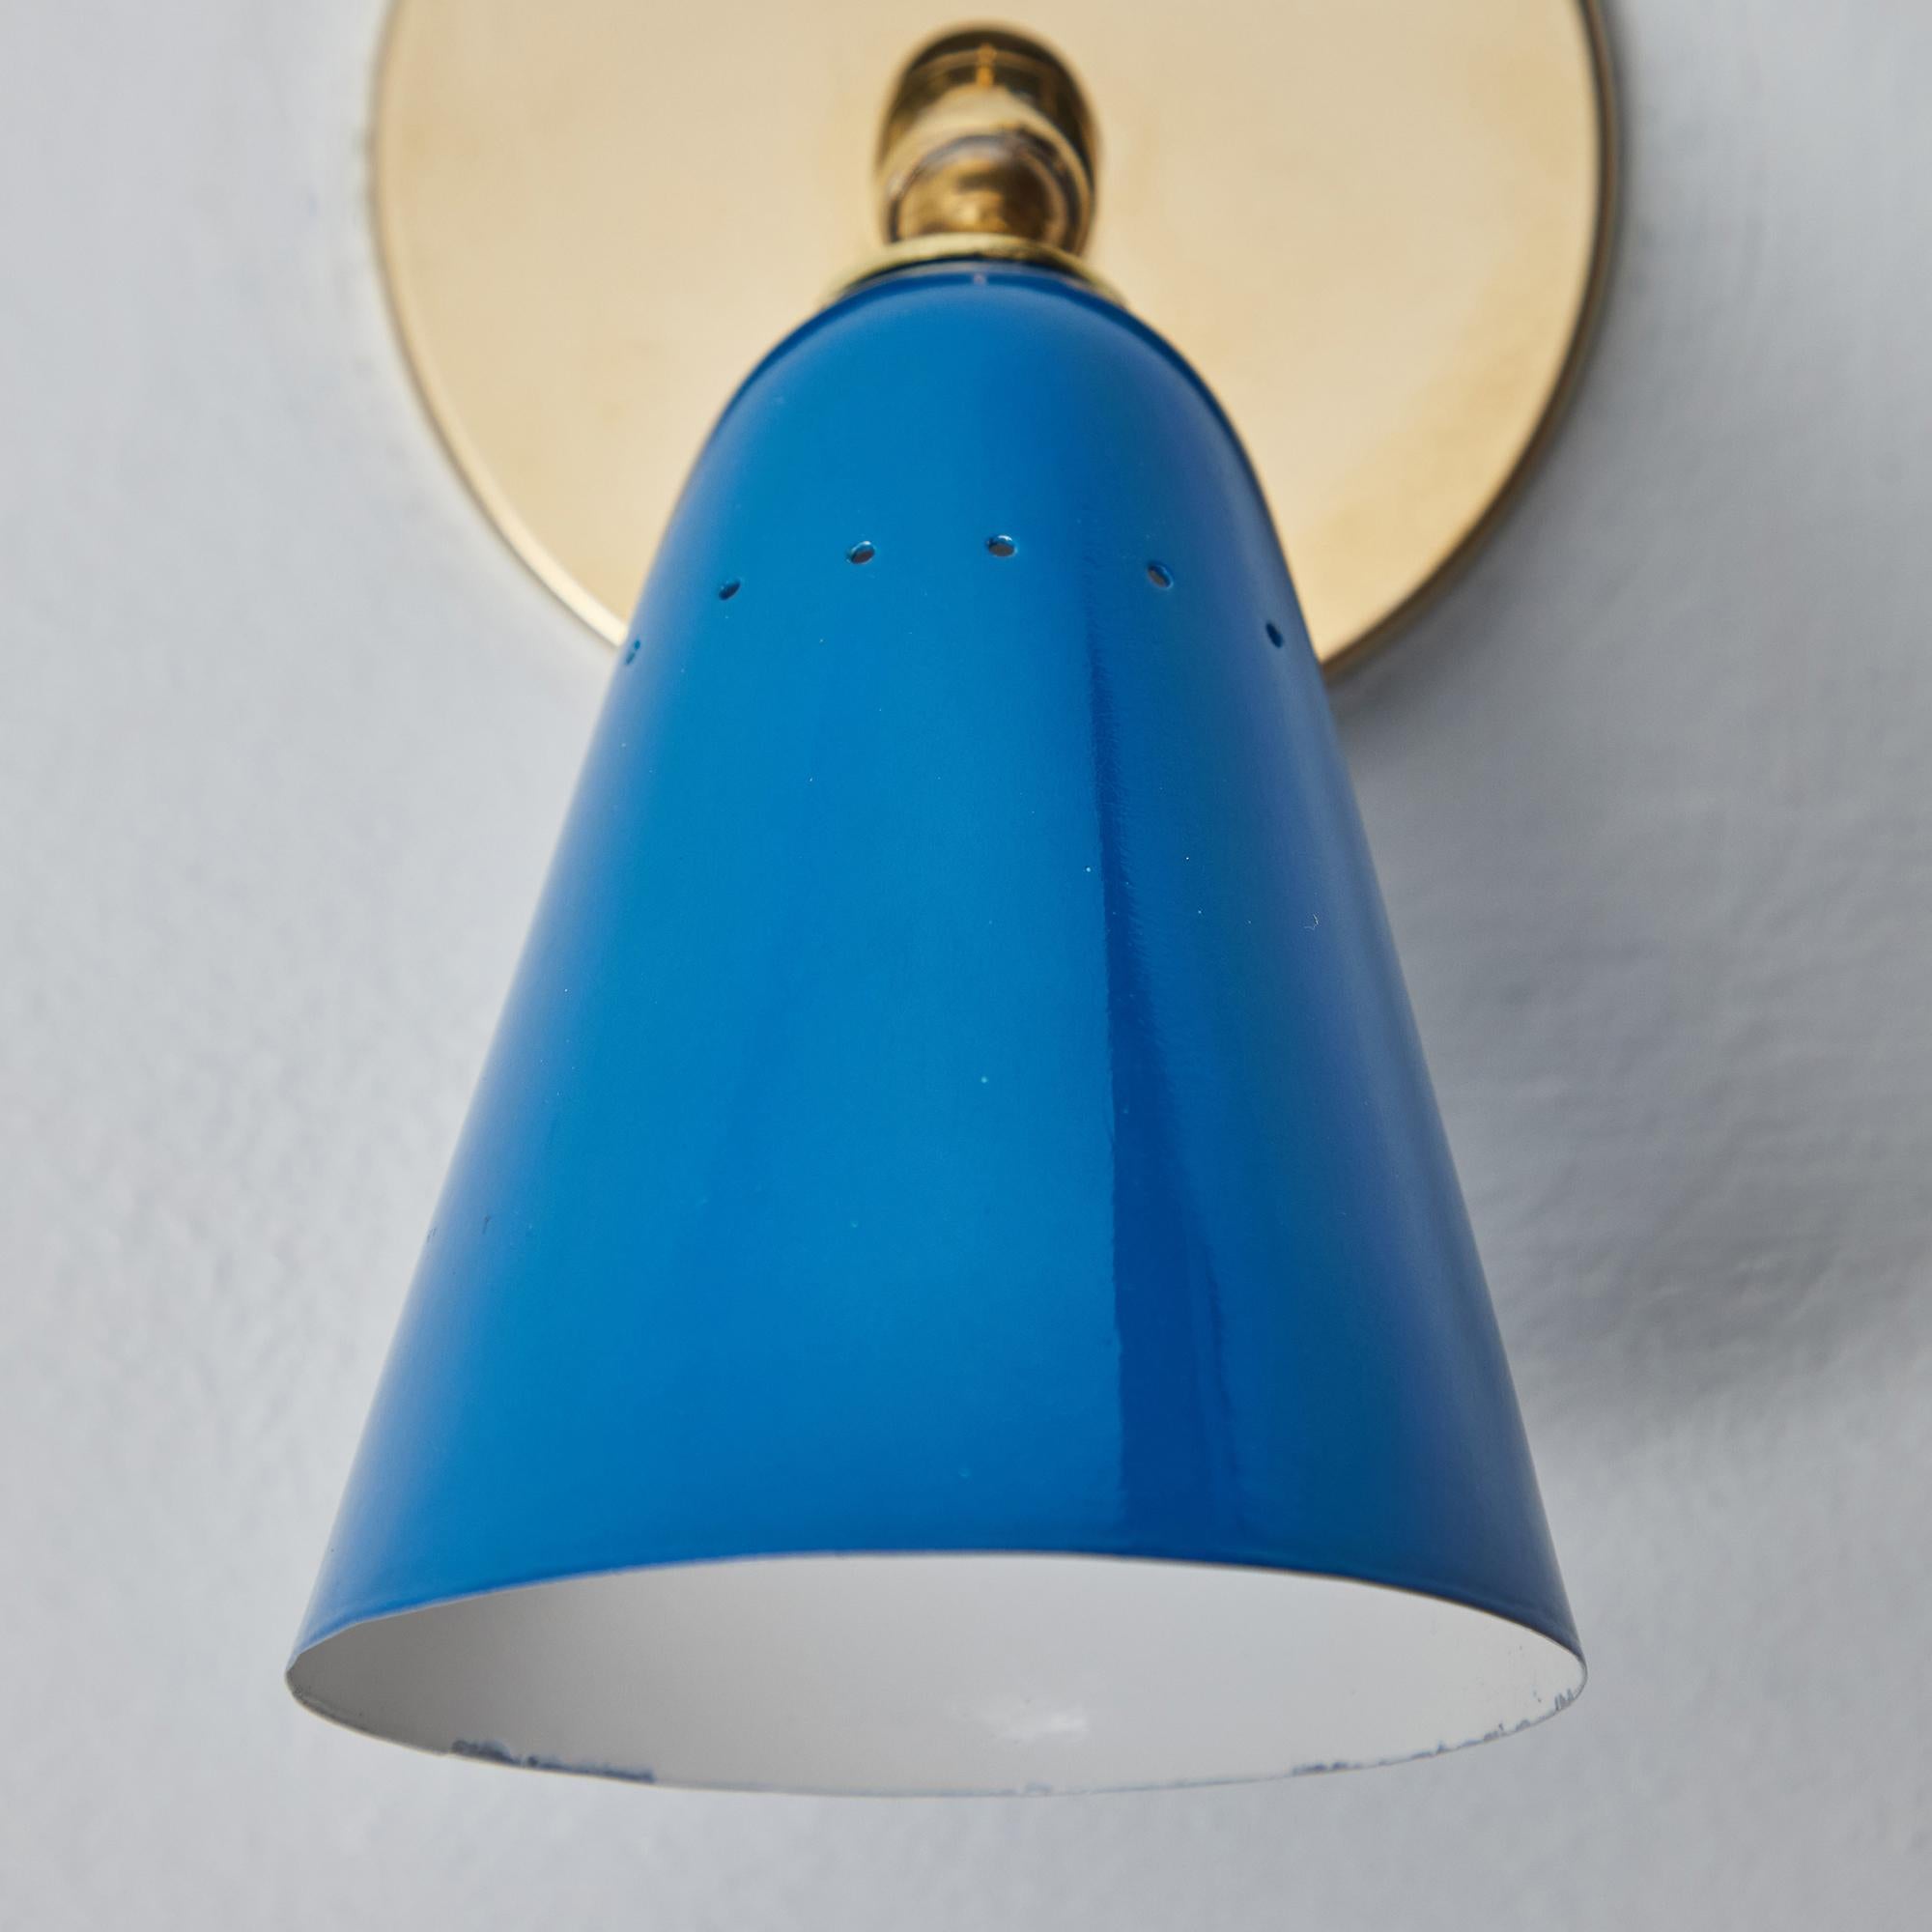 1960s Gino Sarfatti Model #26b Blue and Brass Wall Lamp for Arteluce In Good Condition For Sale In Glendale, CA